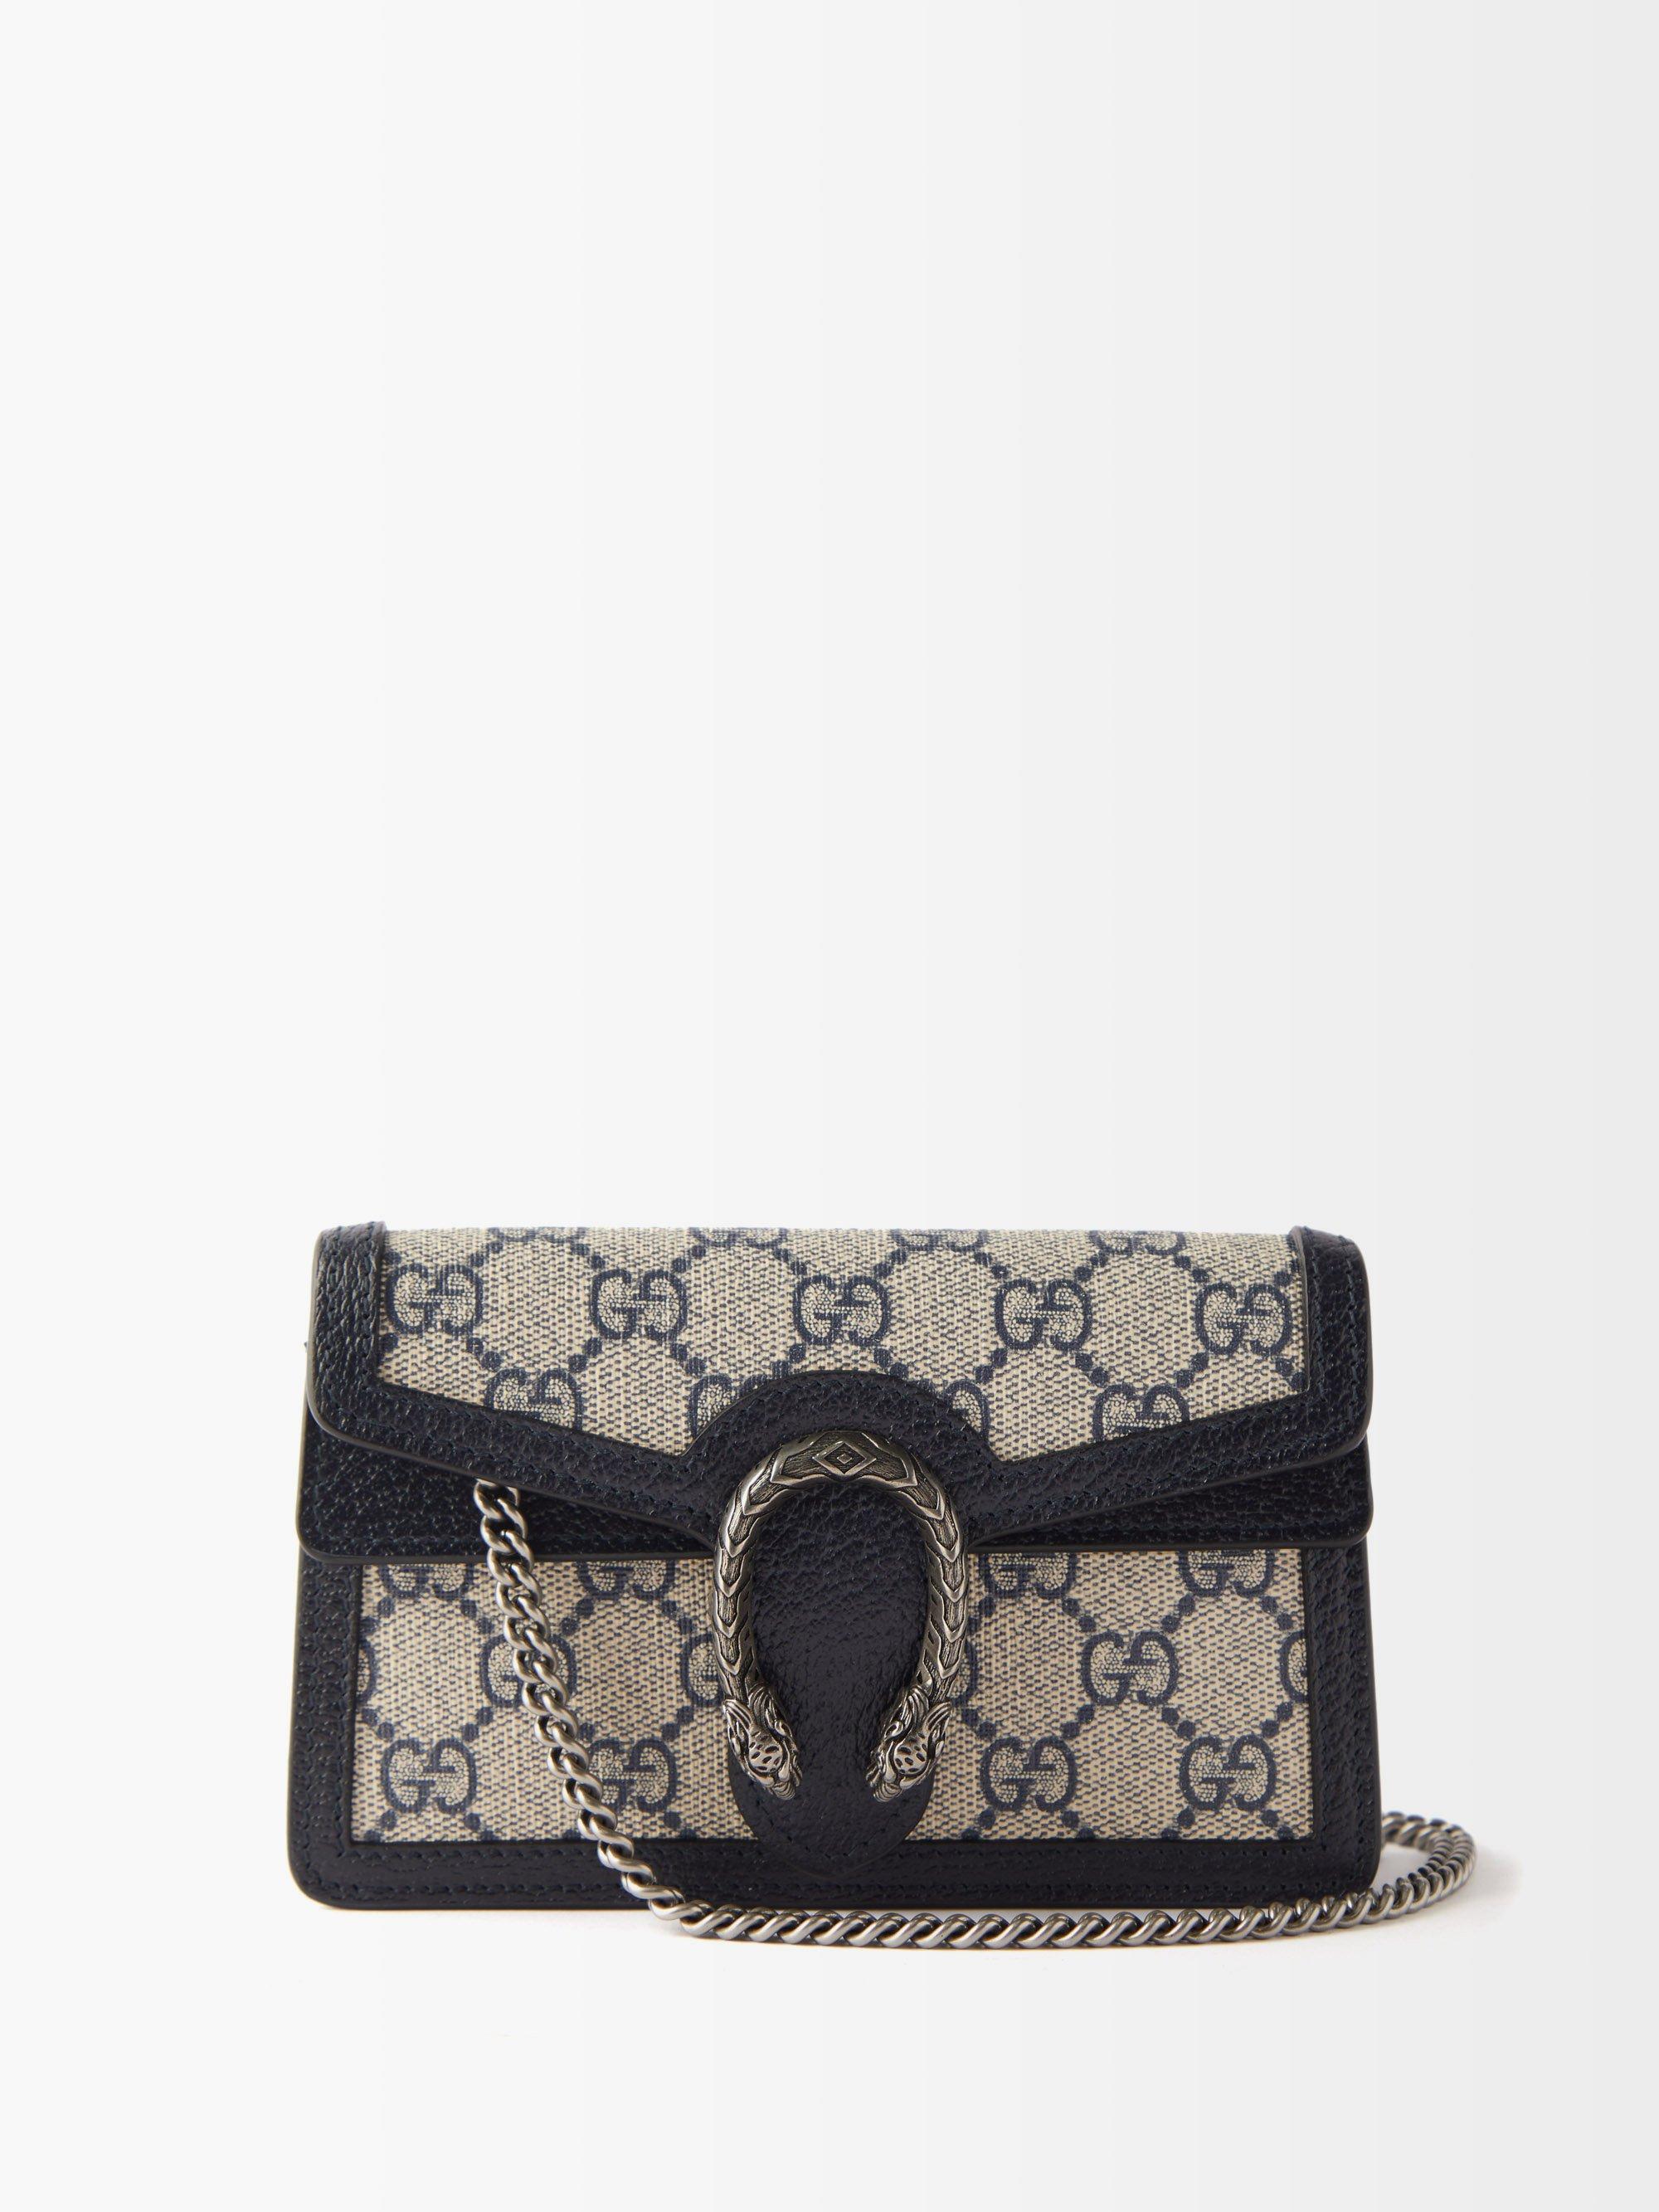 Gucci Dionysus Super Mini Leather-trimmed Printed Coated-canvas Shoulder Bag  in Natural | Lyst